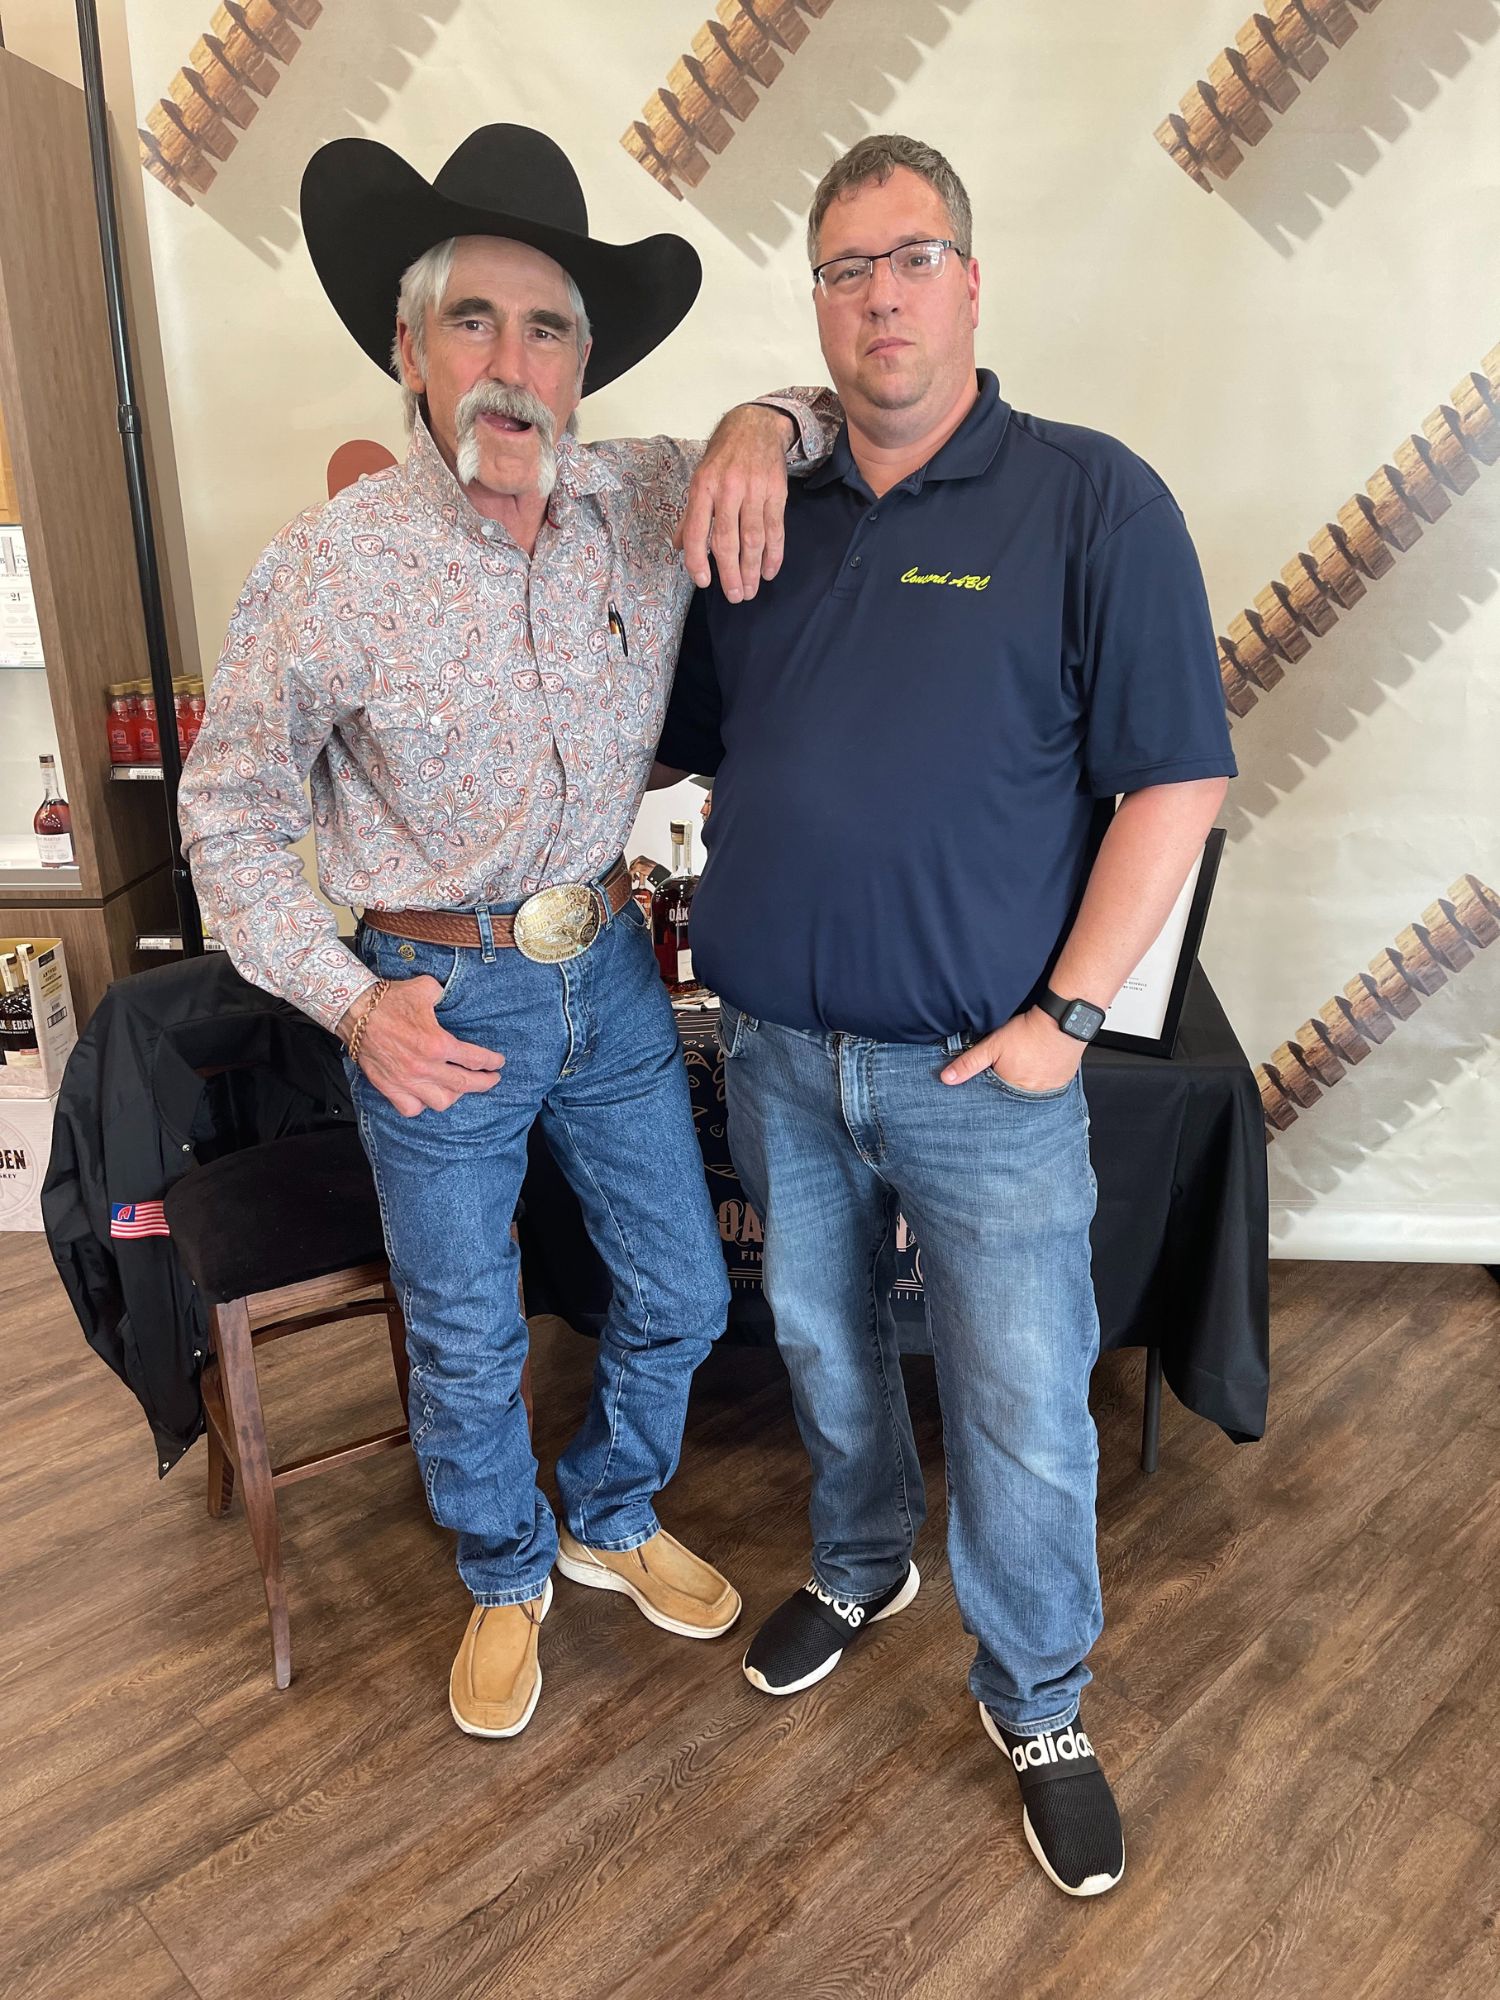 Phil from Concord ABC with Forrie J. Smith from the series Yellowstone (Forrie was a Brand Ambassador for the Product Oak and Eden)